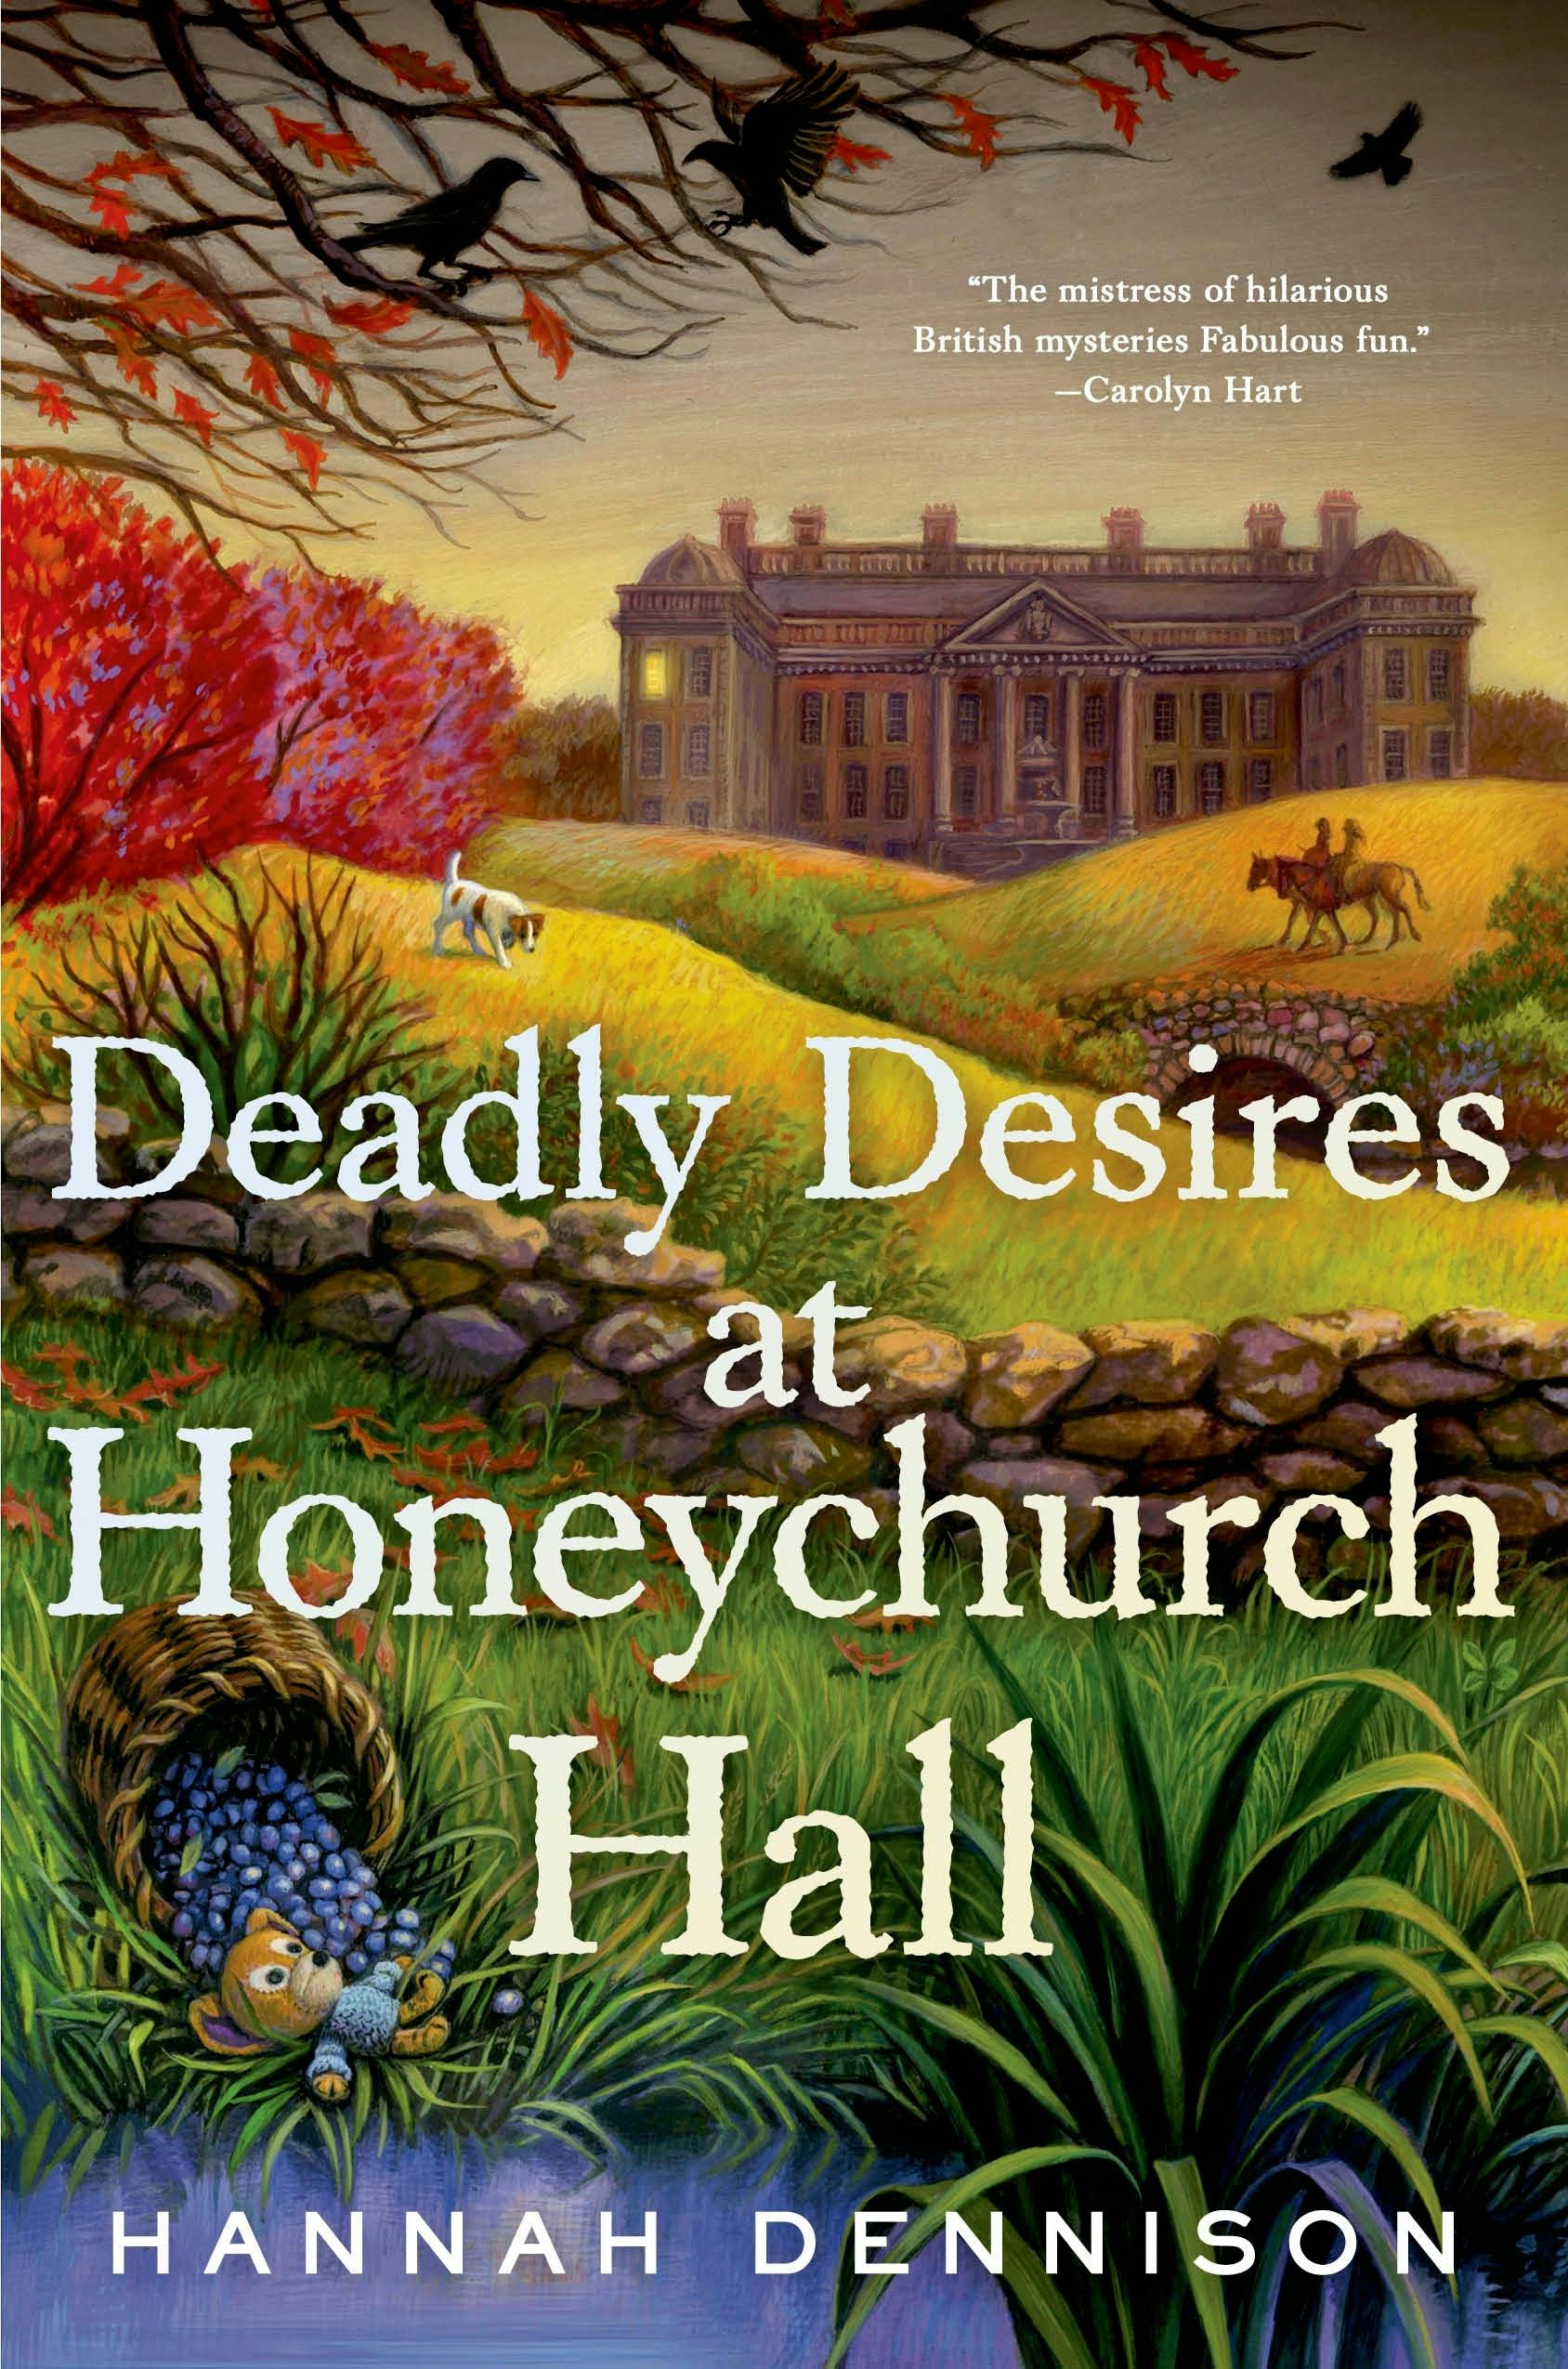 Image of Deadly Desires at Honeychurch Hall